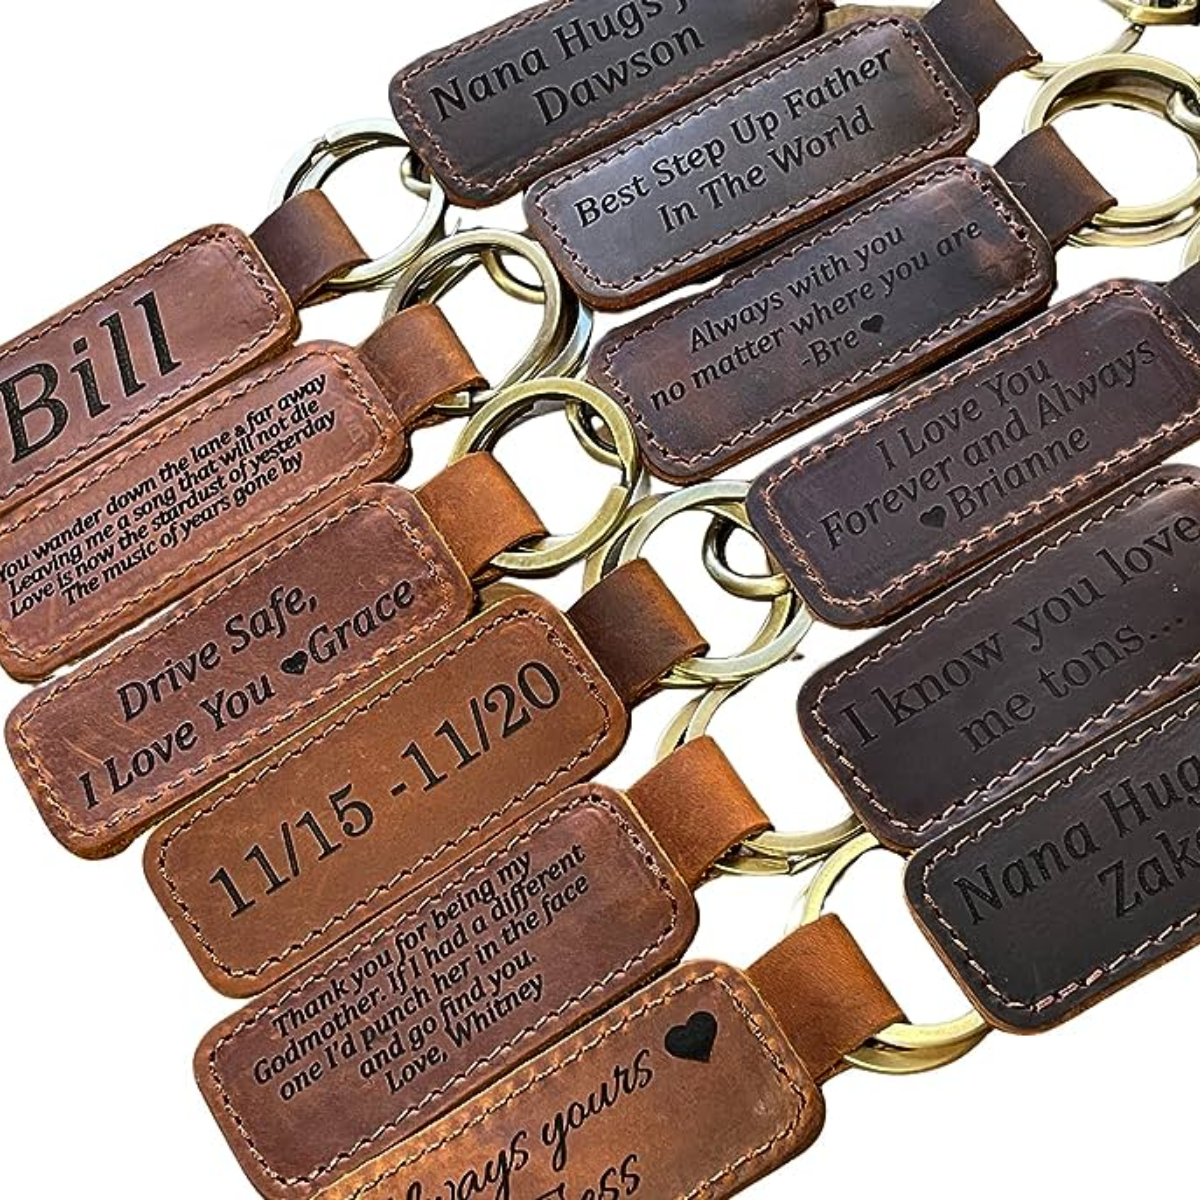 14. Artisanal Personalized Keychain: A Thoughtful and Unique 2nd Year Anniversary Gift for Him